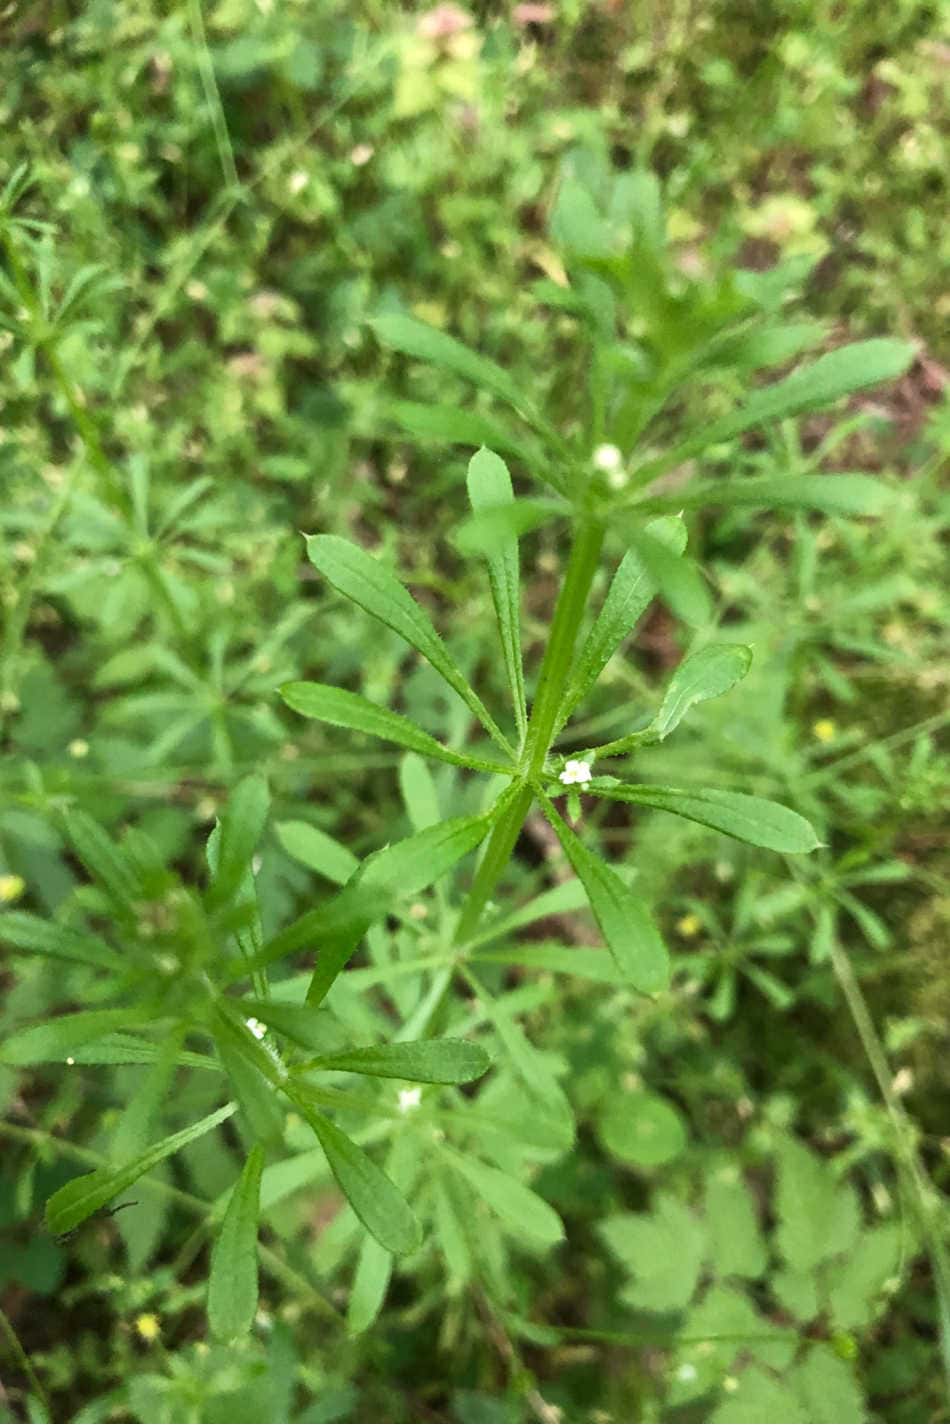 cleavers from above showing flowers